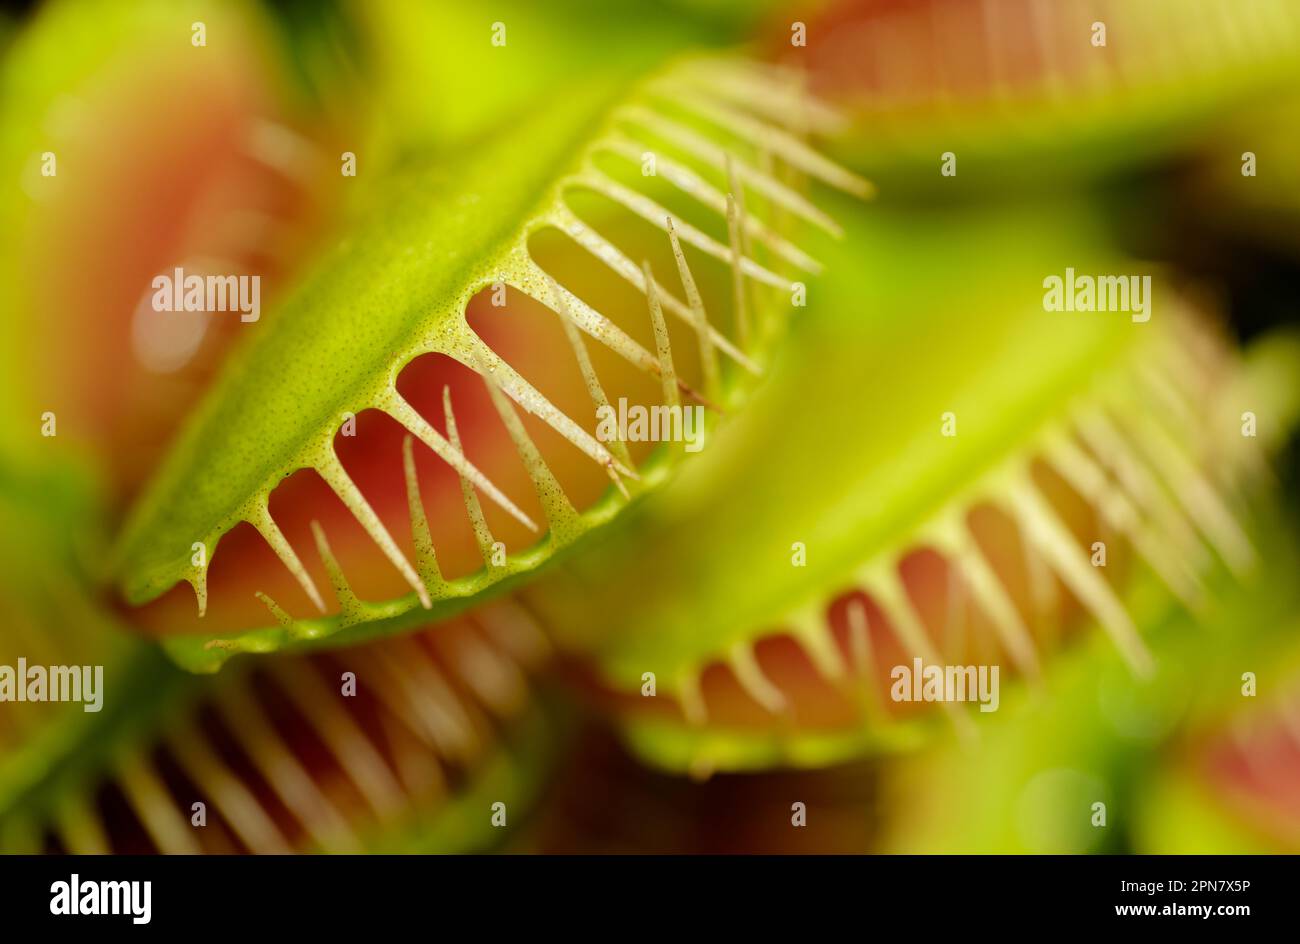 Group of Venus flytraps, green and red carnivorous wetlands plant, abstract floral background Stock Photo